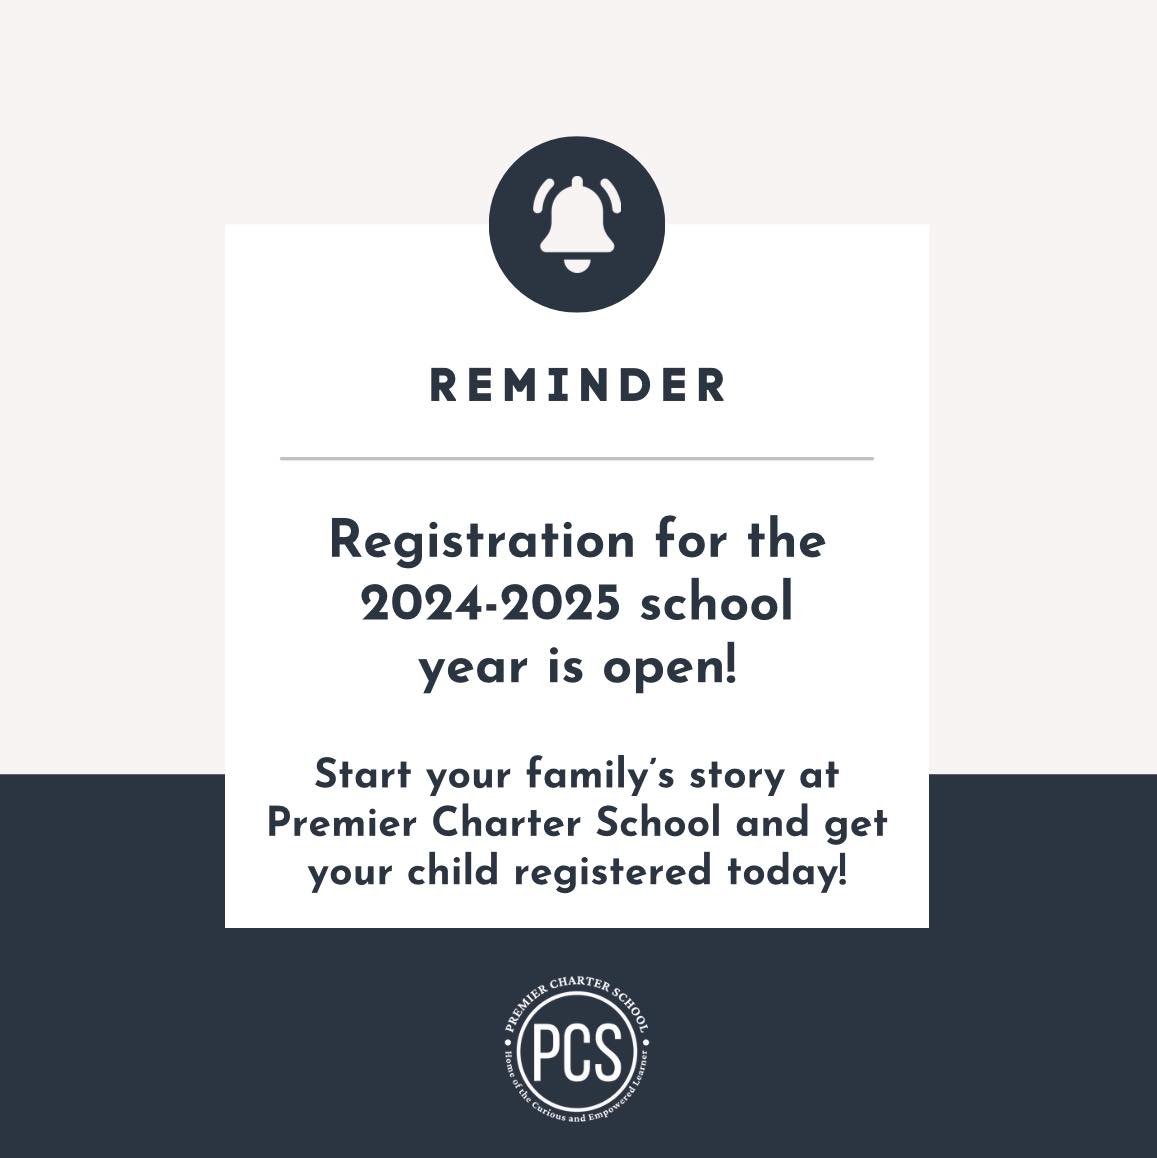 Start your family&rsquo;s story at Premier Charter School 🤍

If you have a child, family member, or friend with a student looking to join the Premier Charter School family for the 2024-2025 school year, then now is your time to get registered.

Spac